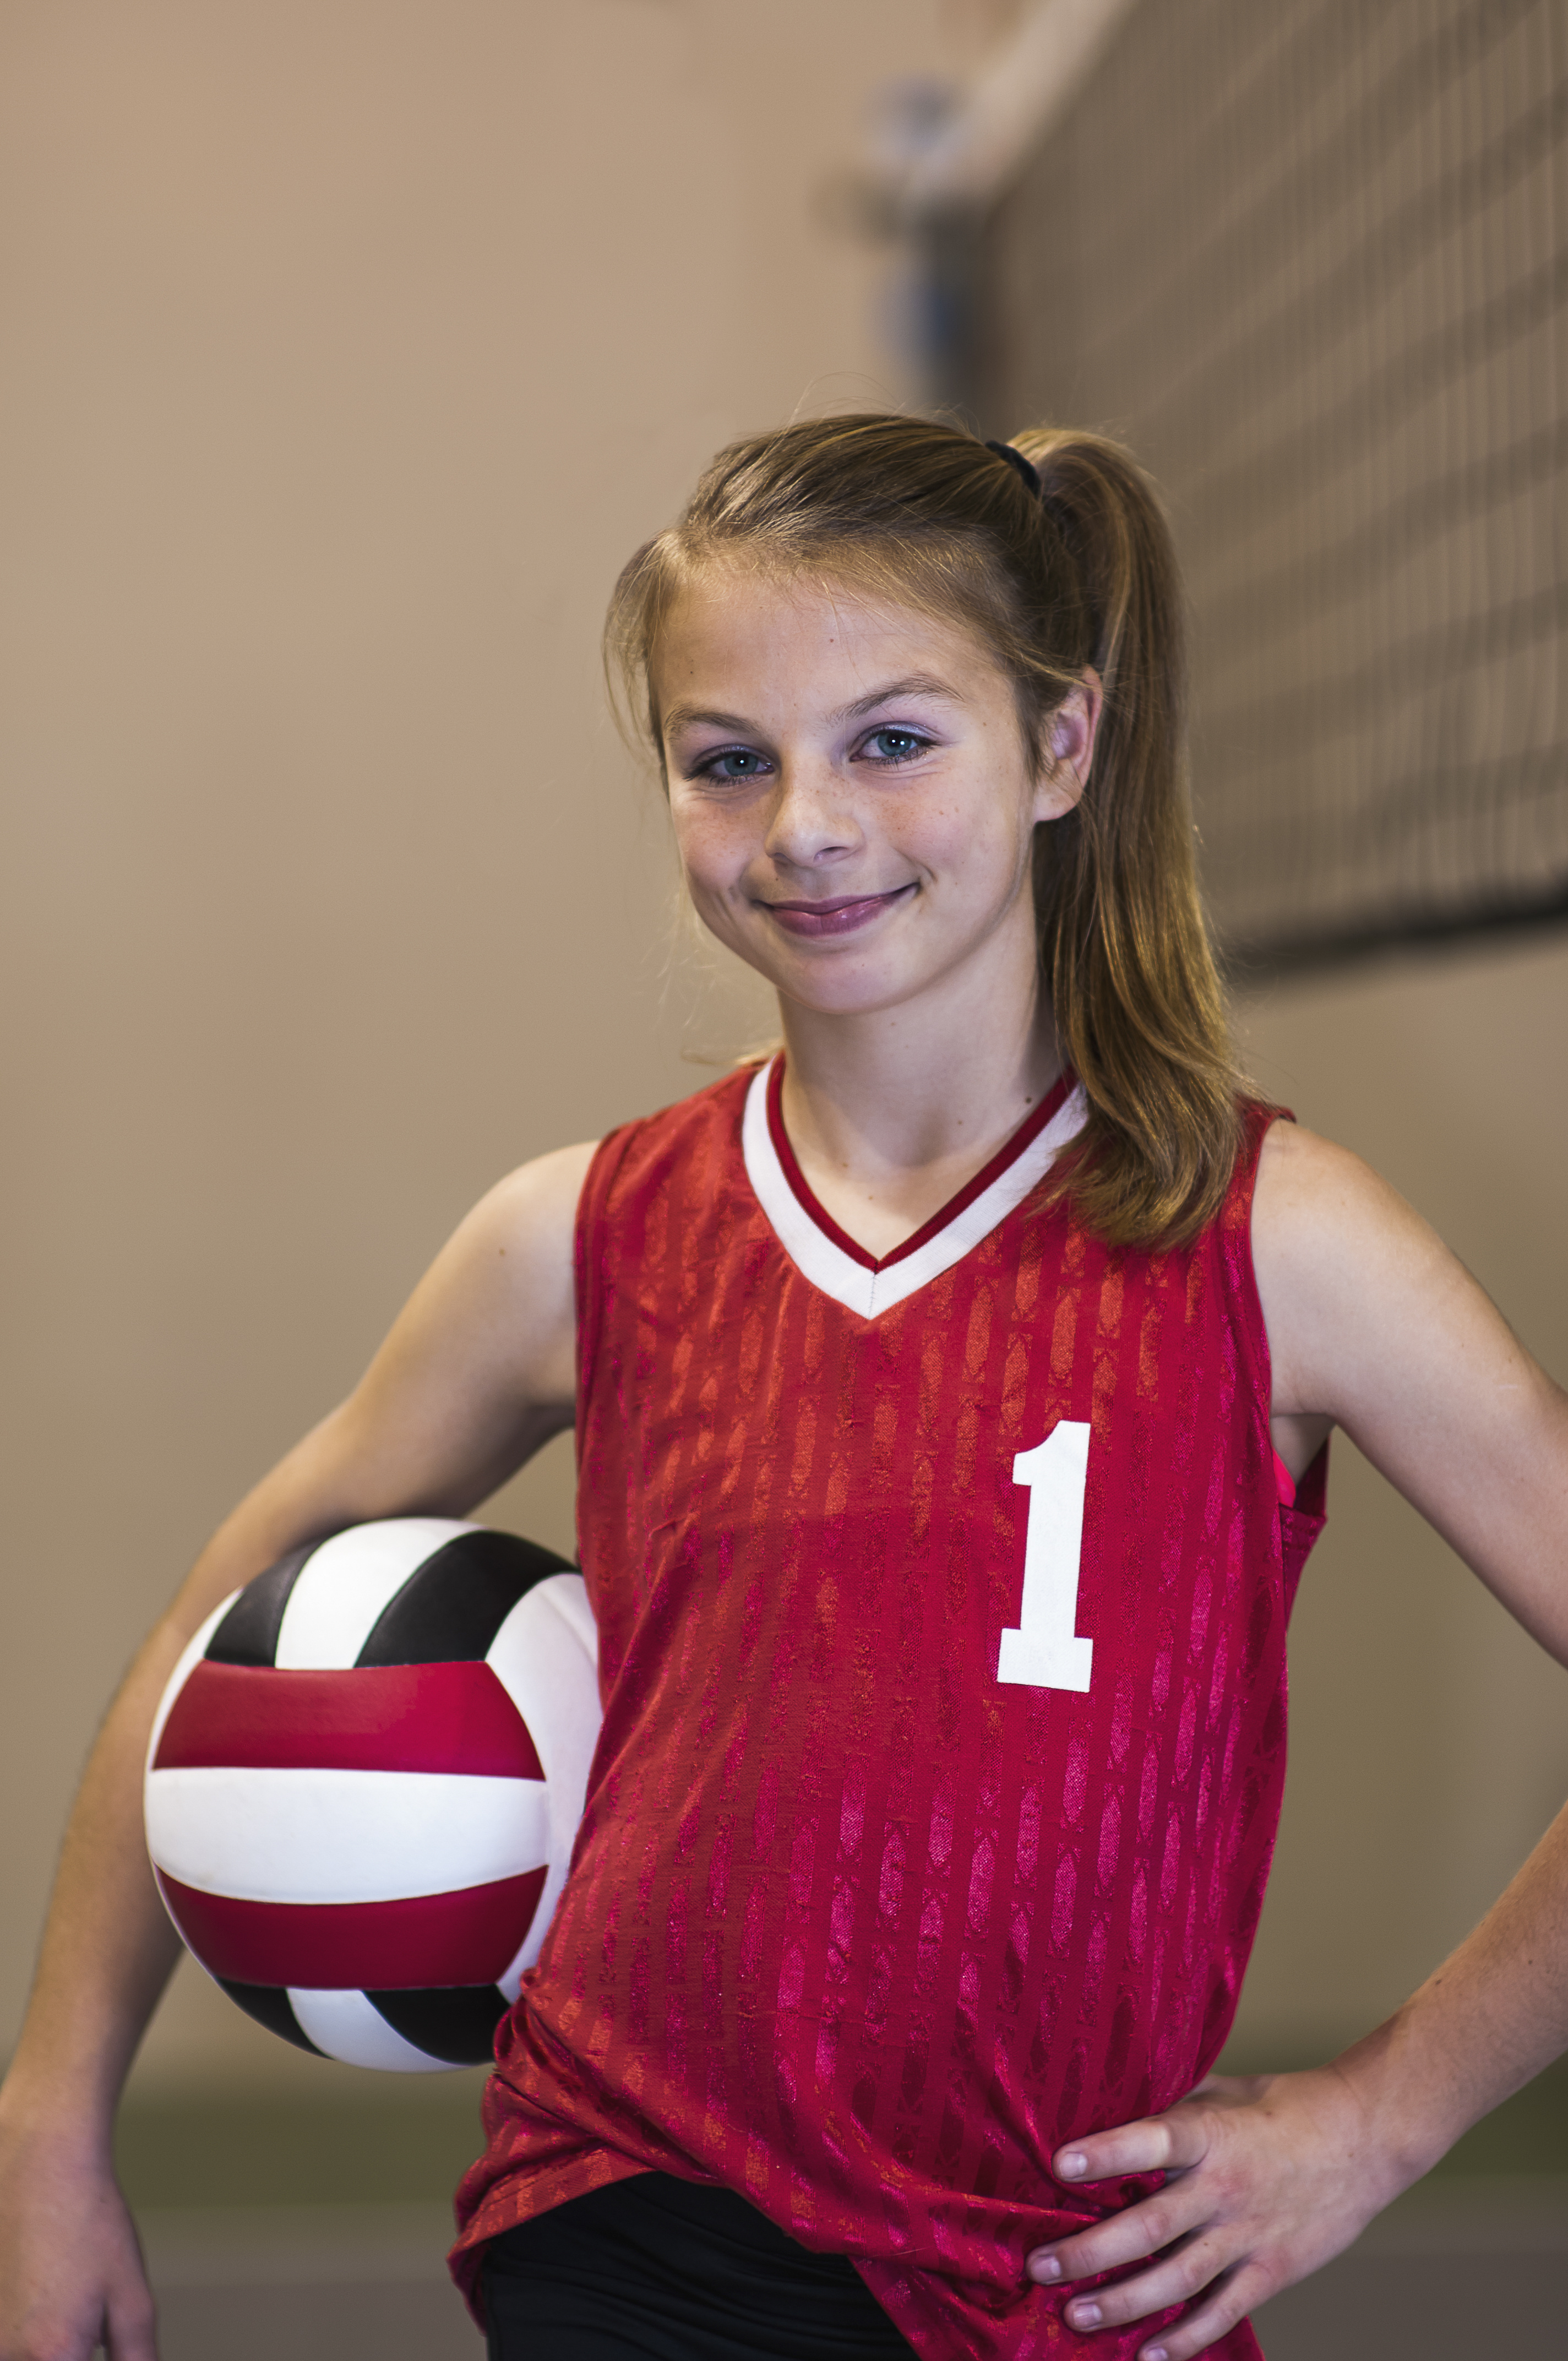 Teenaged girl on volleyball court